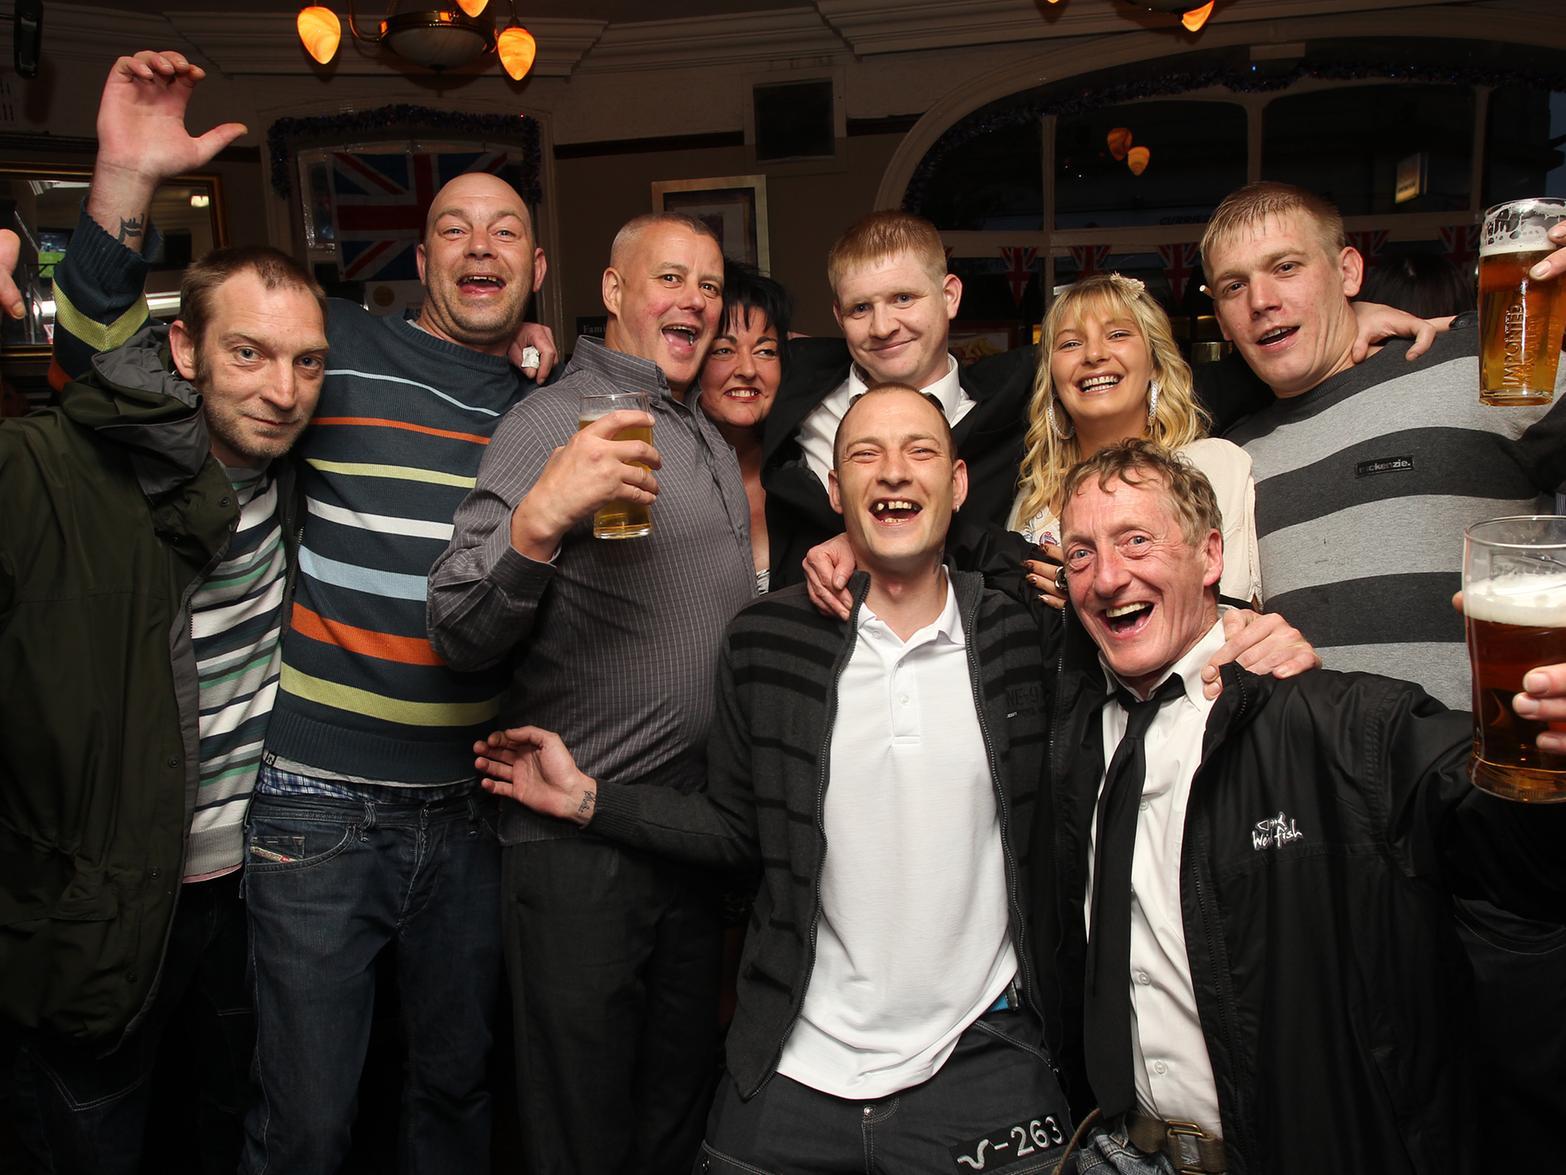 Craig, Roger, Matty, Christine, Karl, Tez, Stevie, Chani and Stoz out in Halifax back in 2012.